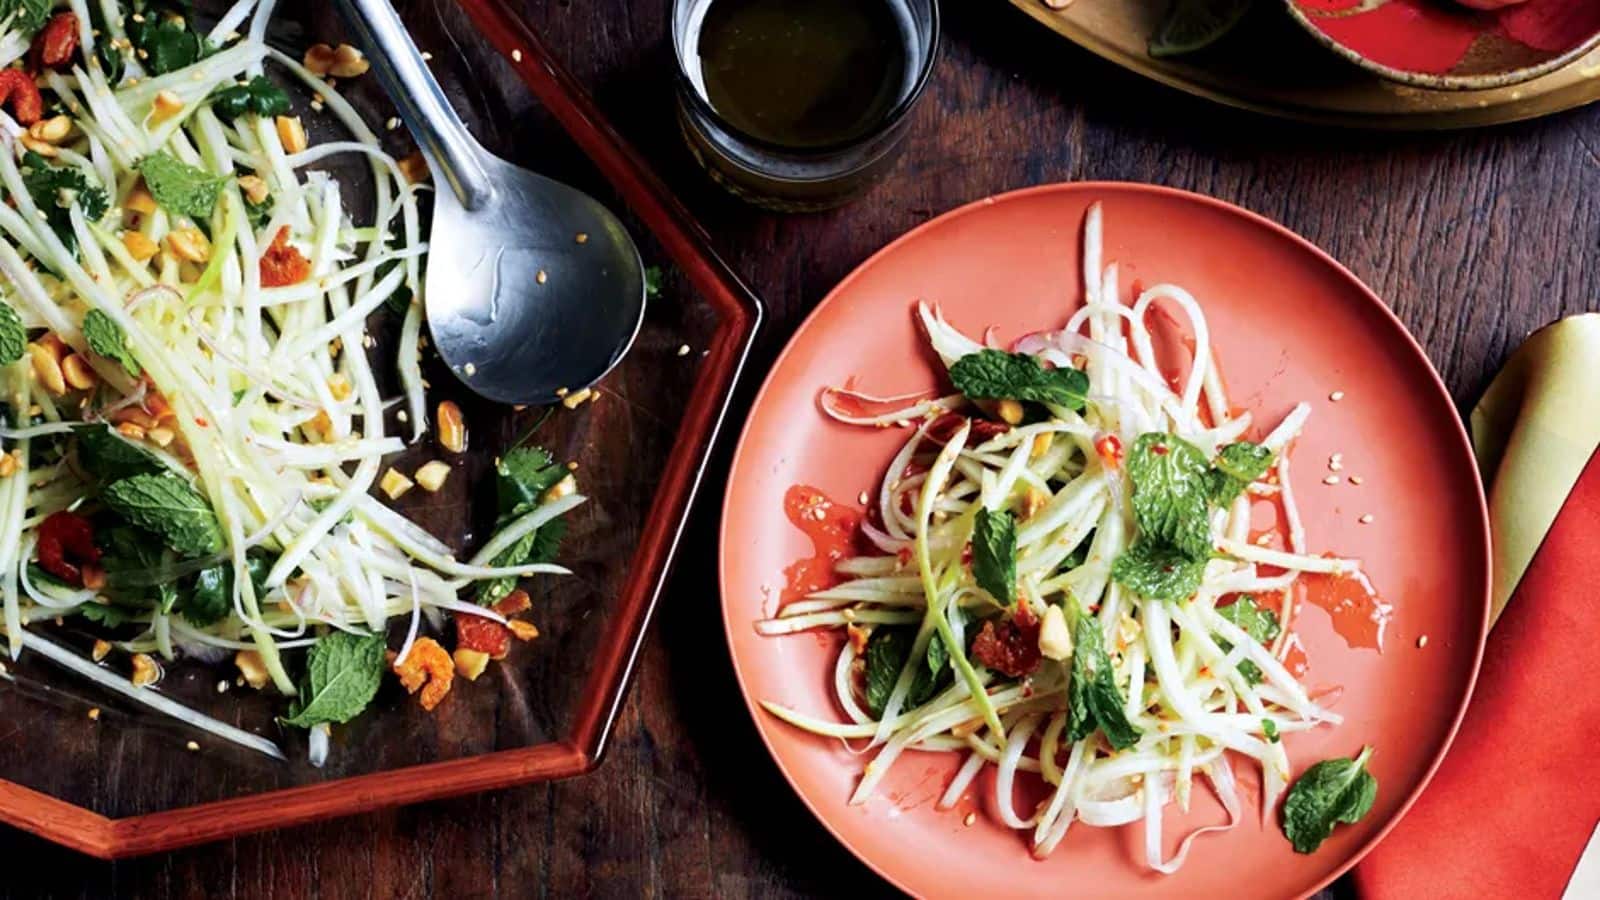 Impress your guests with this innovative Thai green mango salad